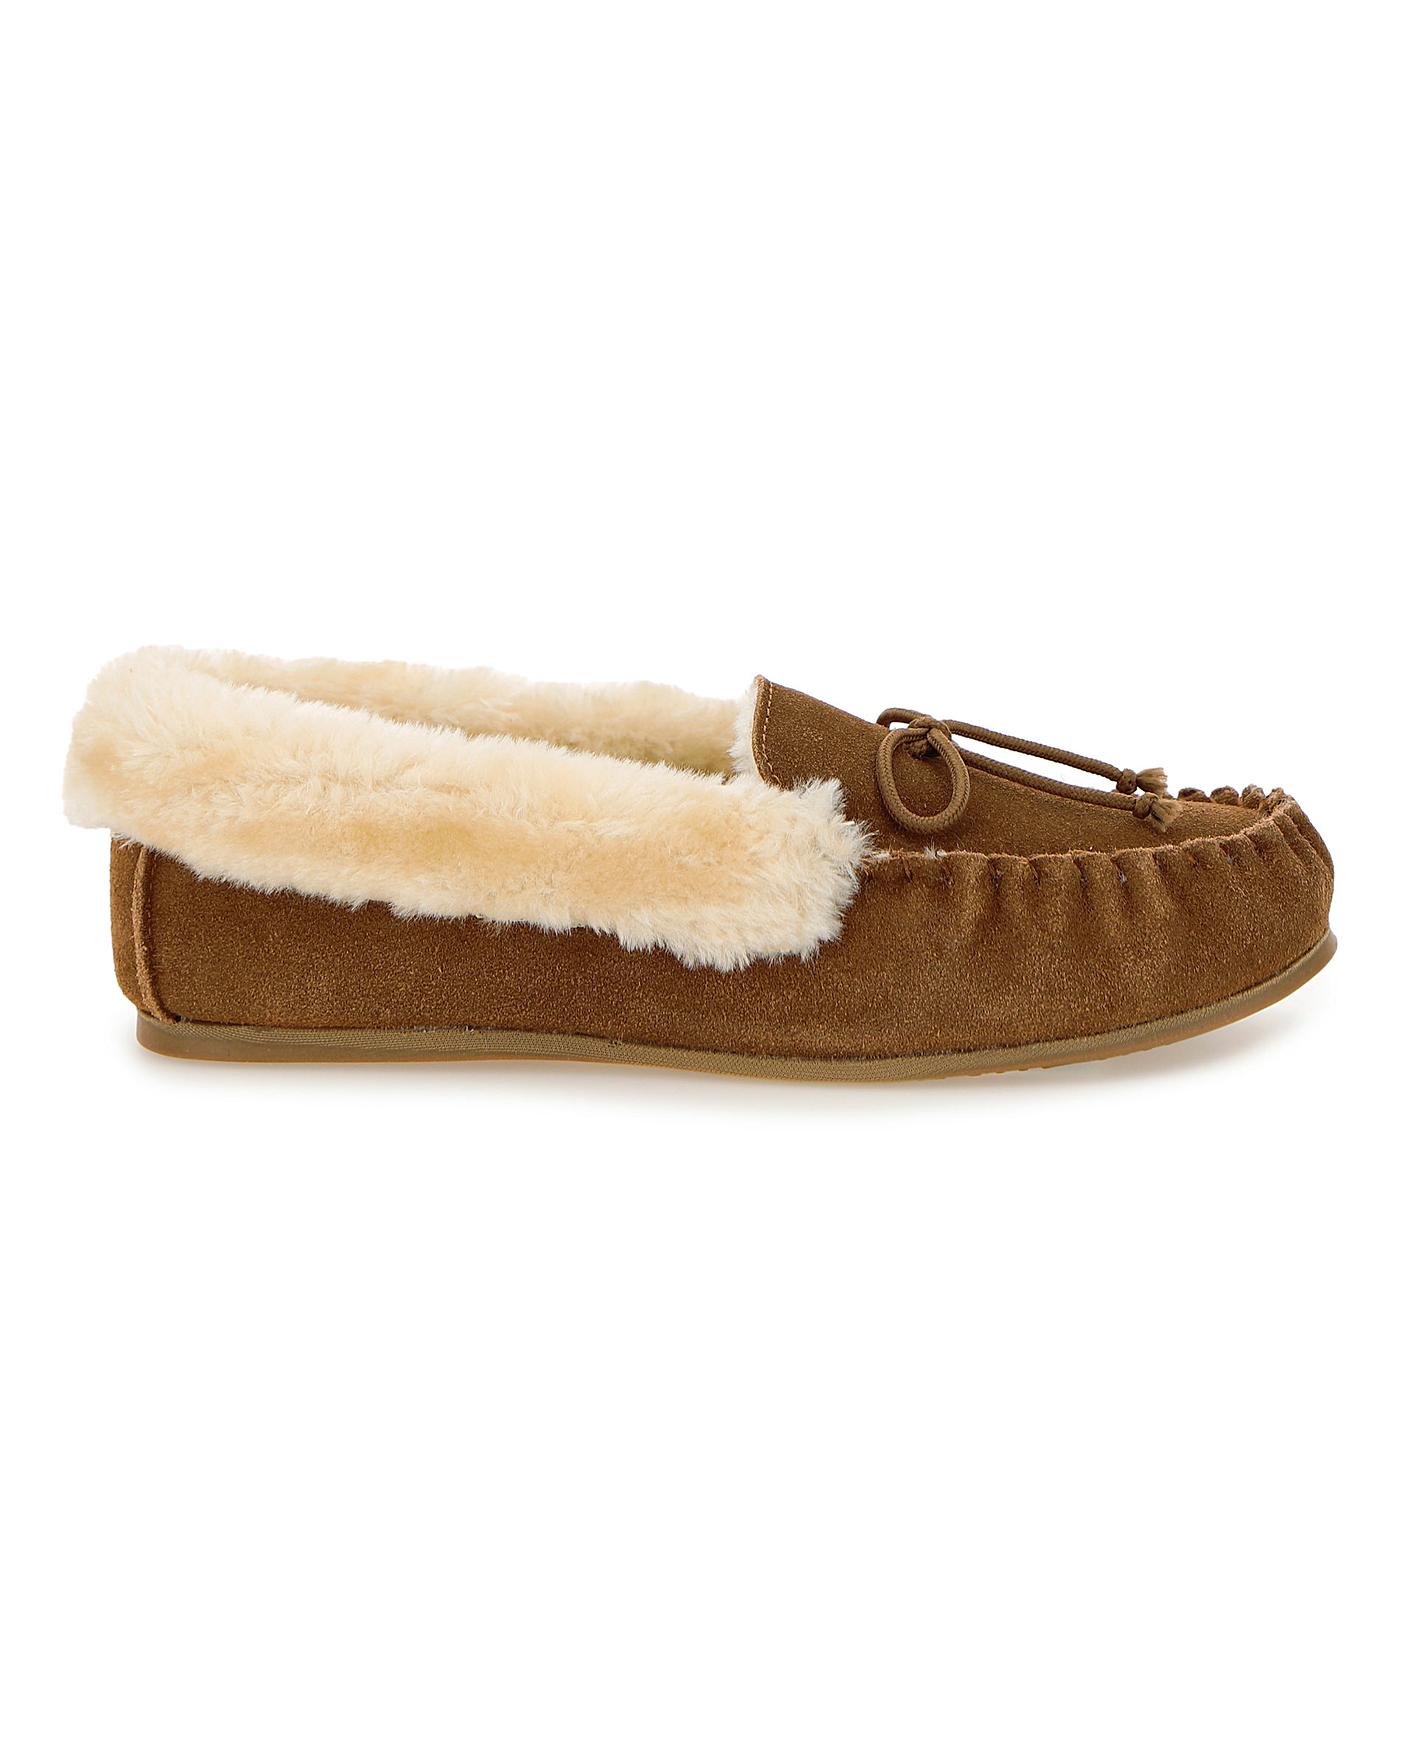 Suede Moccasin Slippers EEE Fit | Marisota